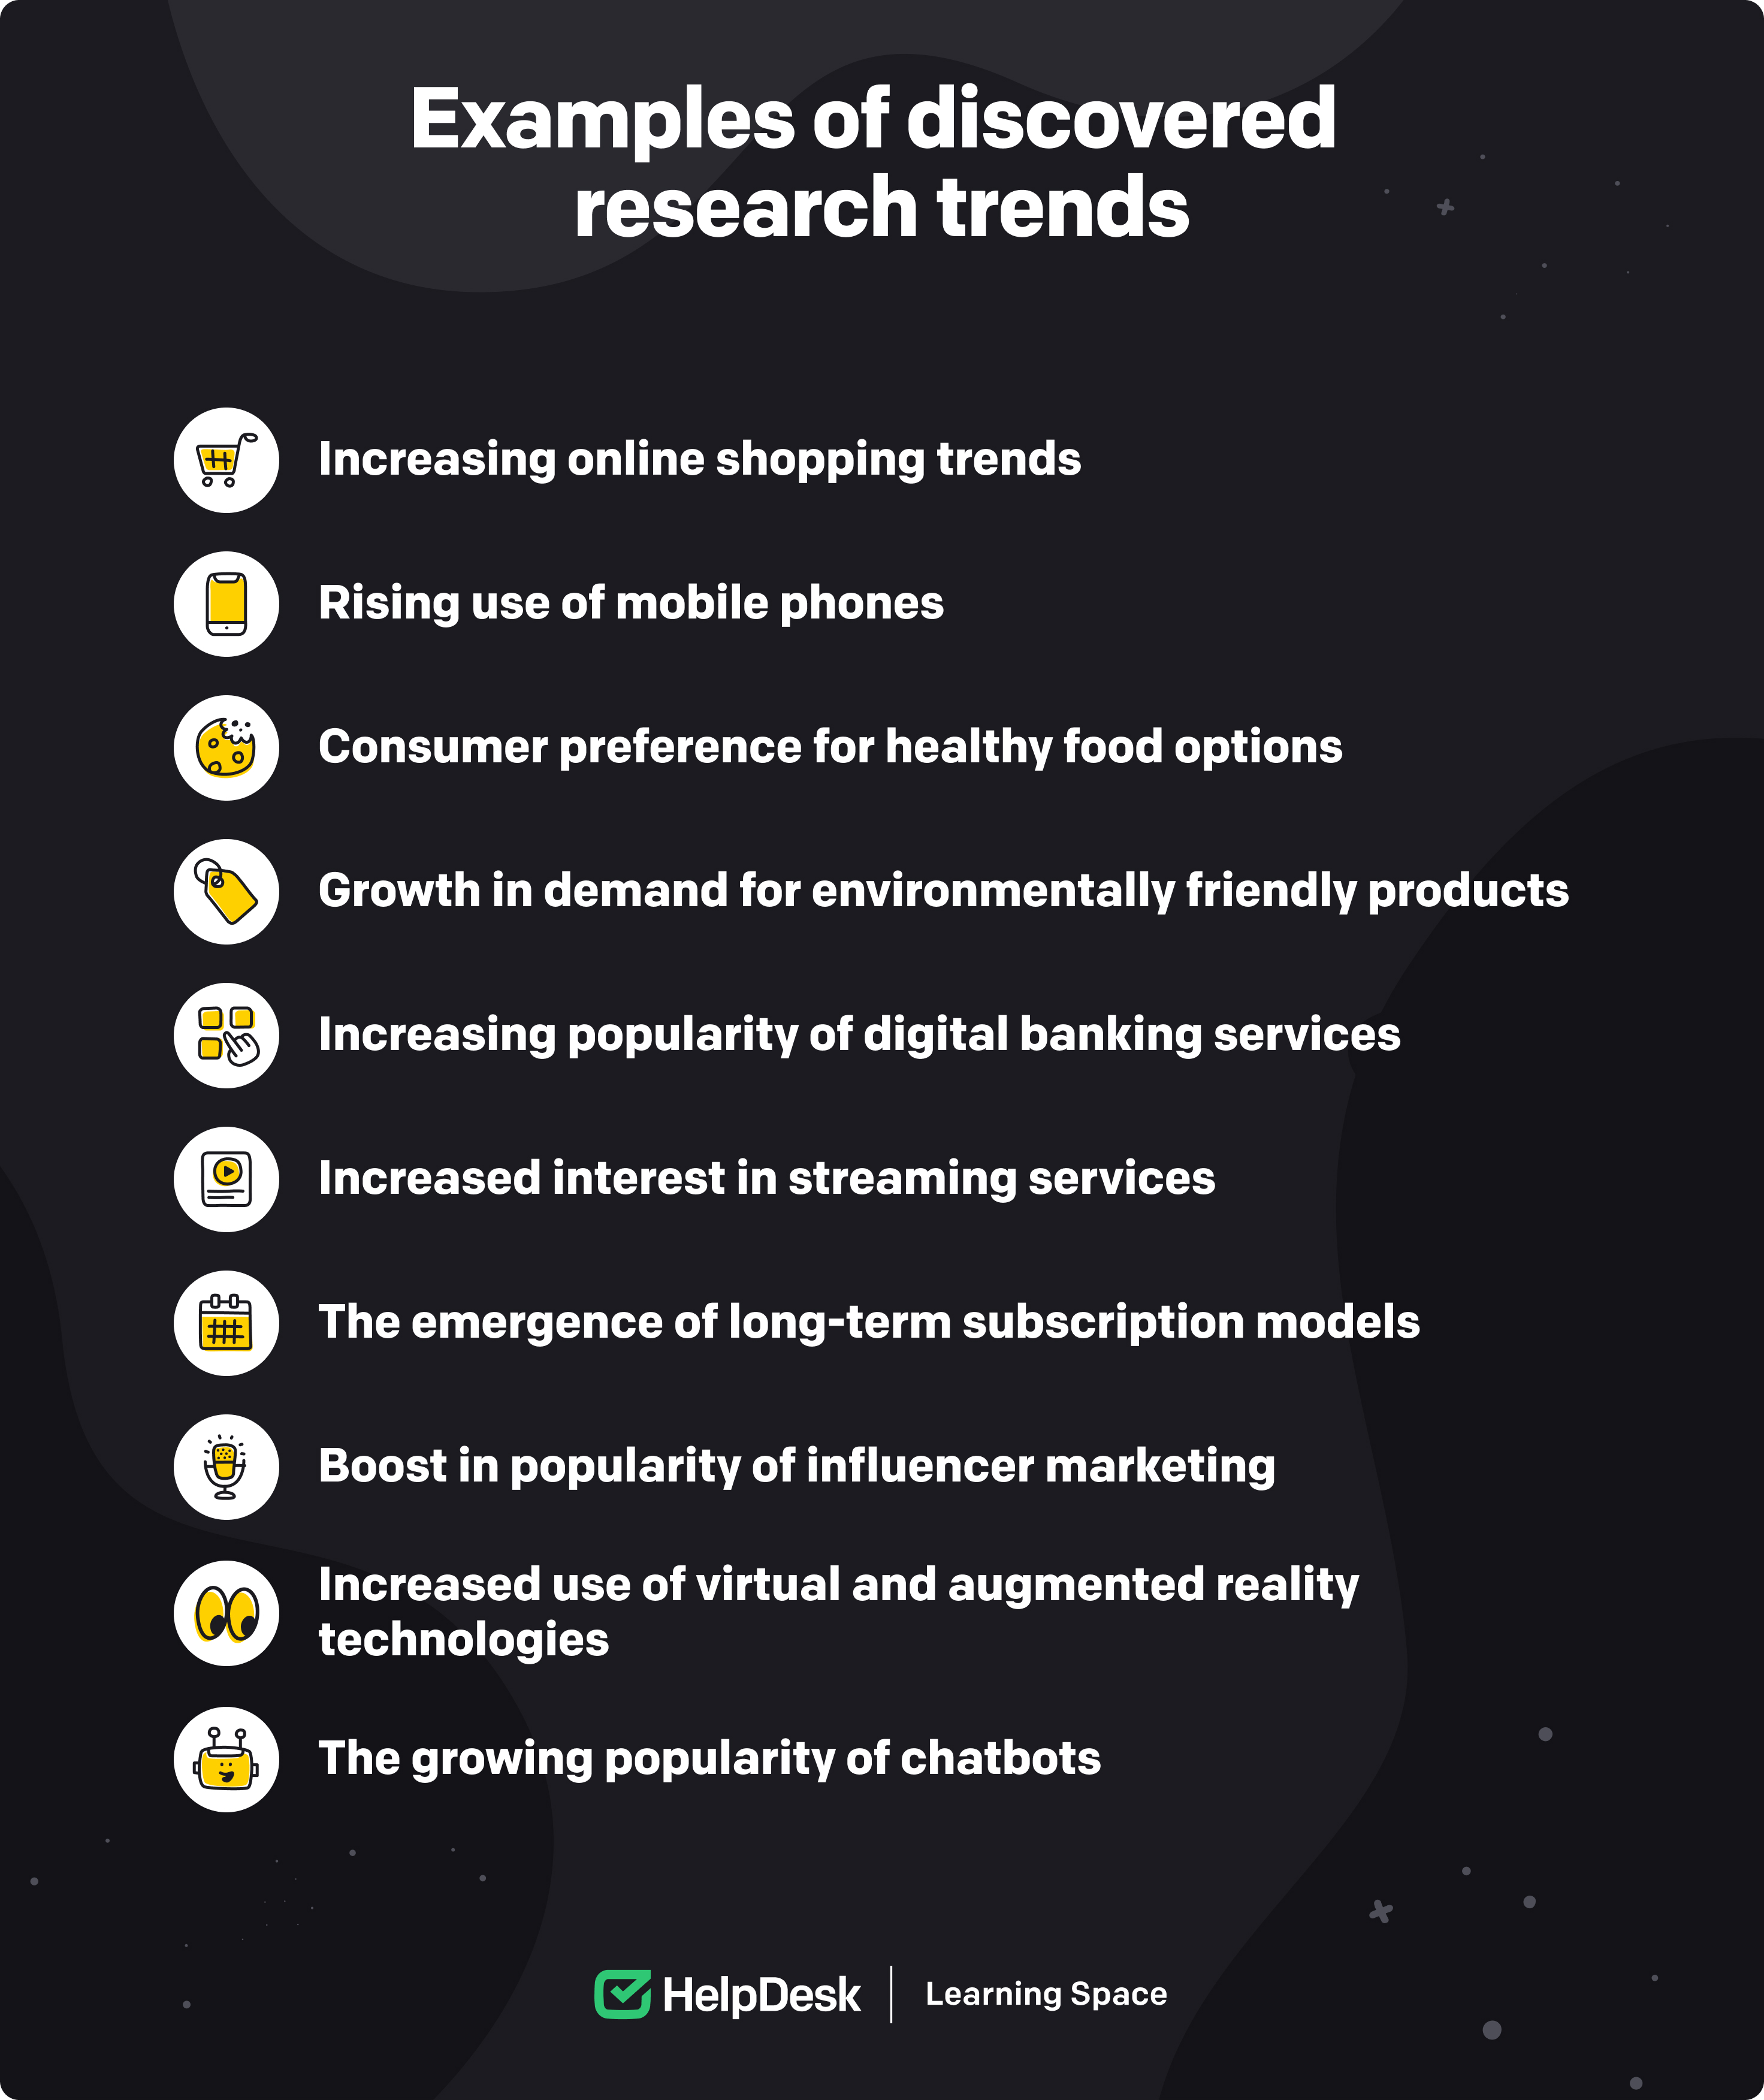 Examples of discovered research trends.